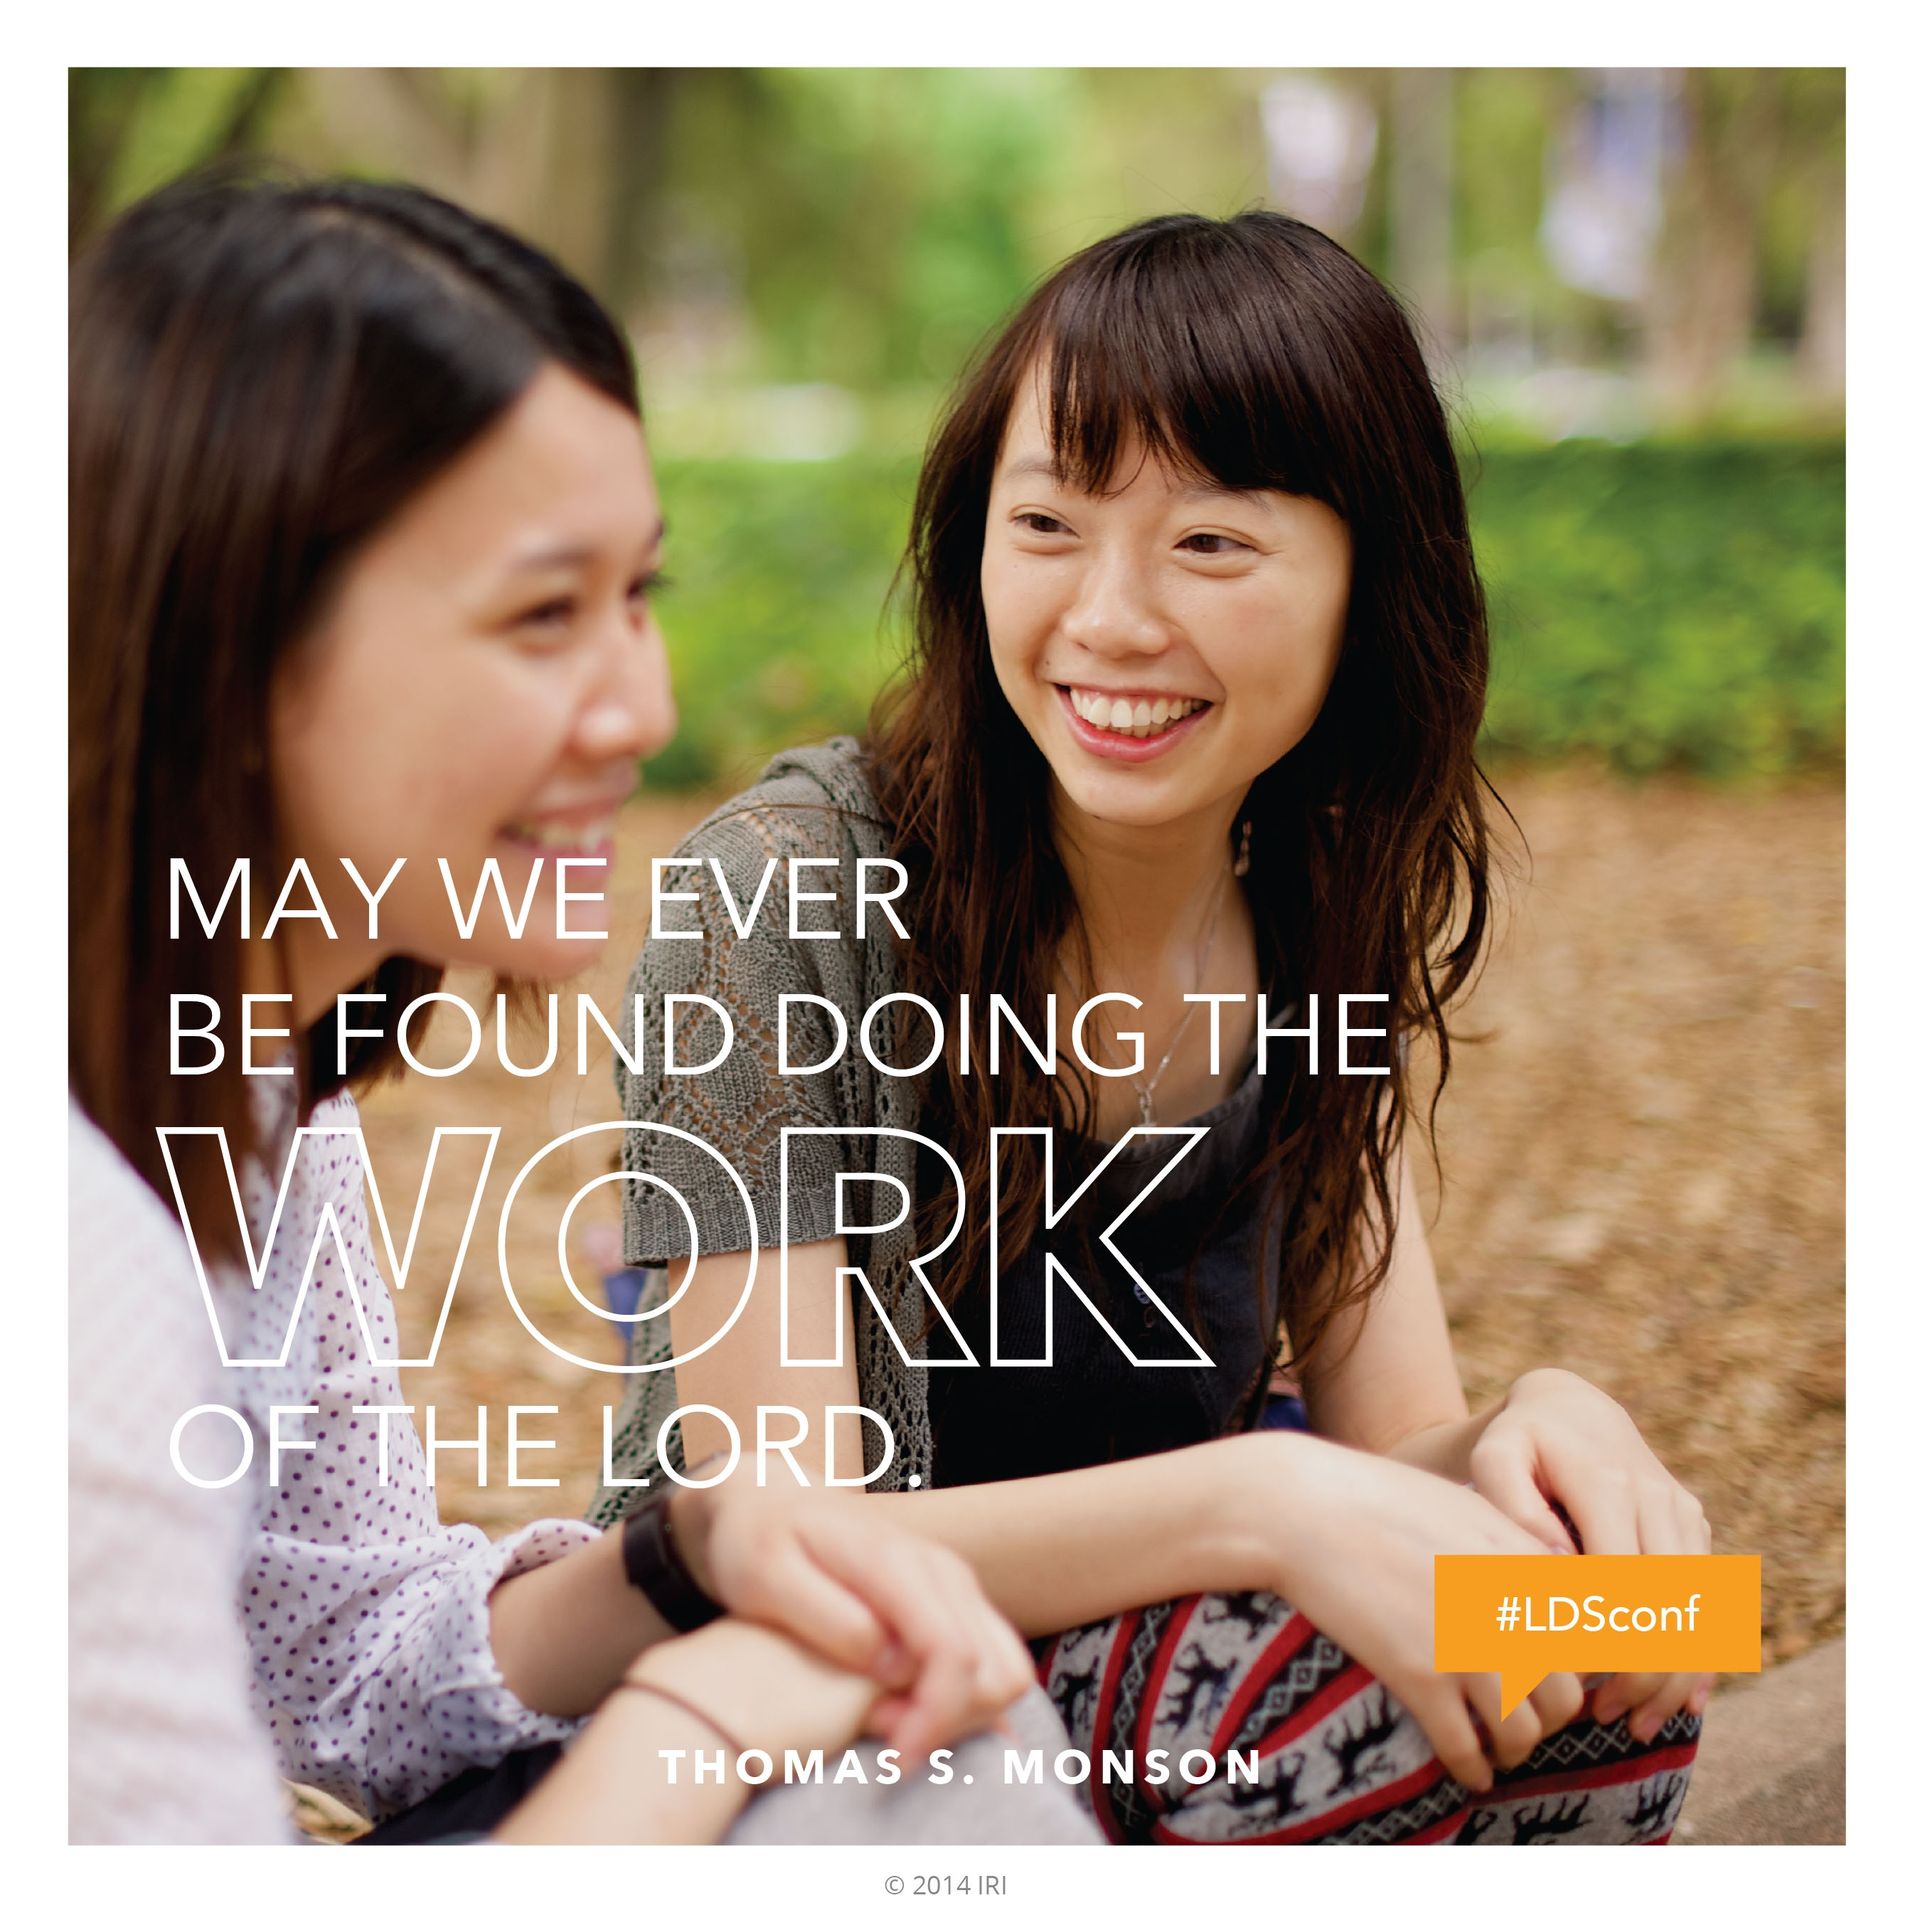 “May we ever be found doing the work of the Lord.”—President Thomas S. Monson, “Until We Meet Again” © undefined ipCode 1.